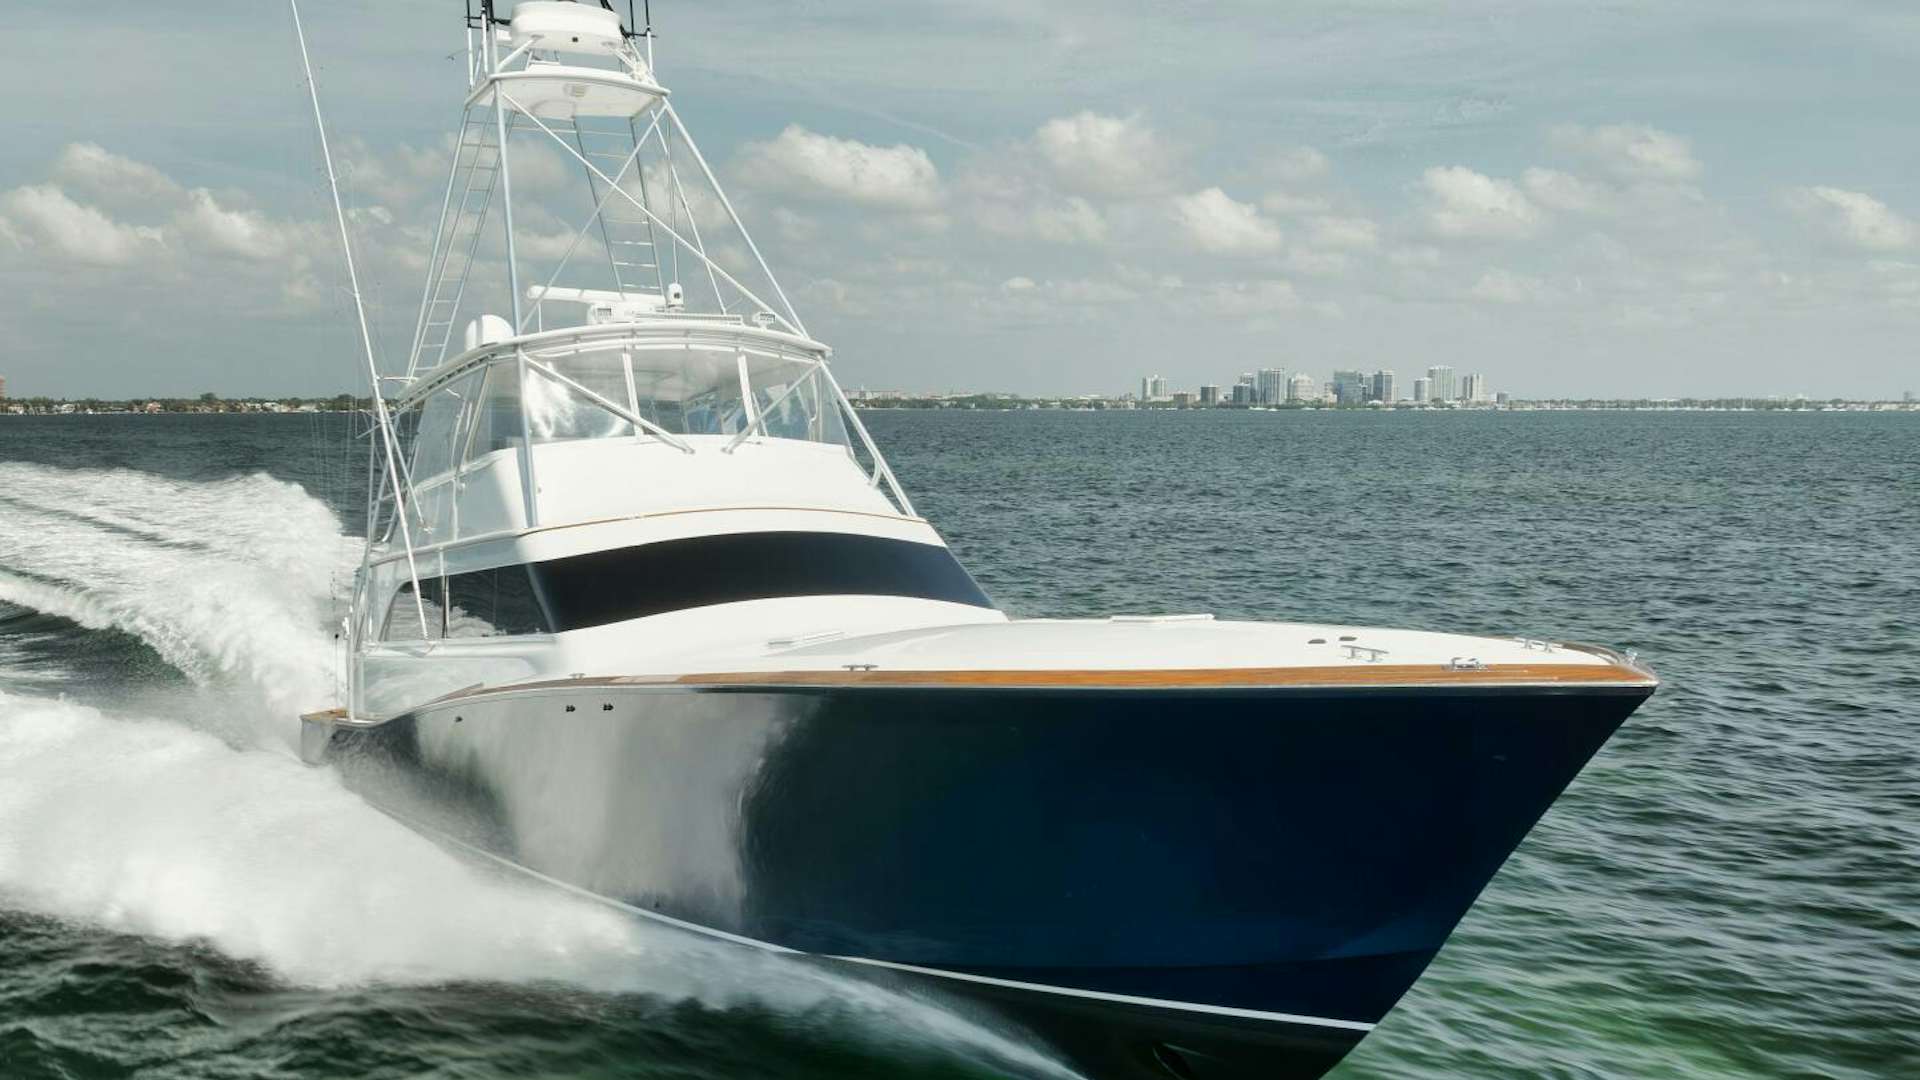 Boxer
Yacht for Sale